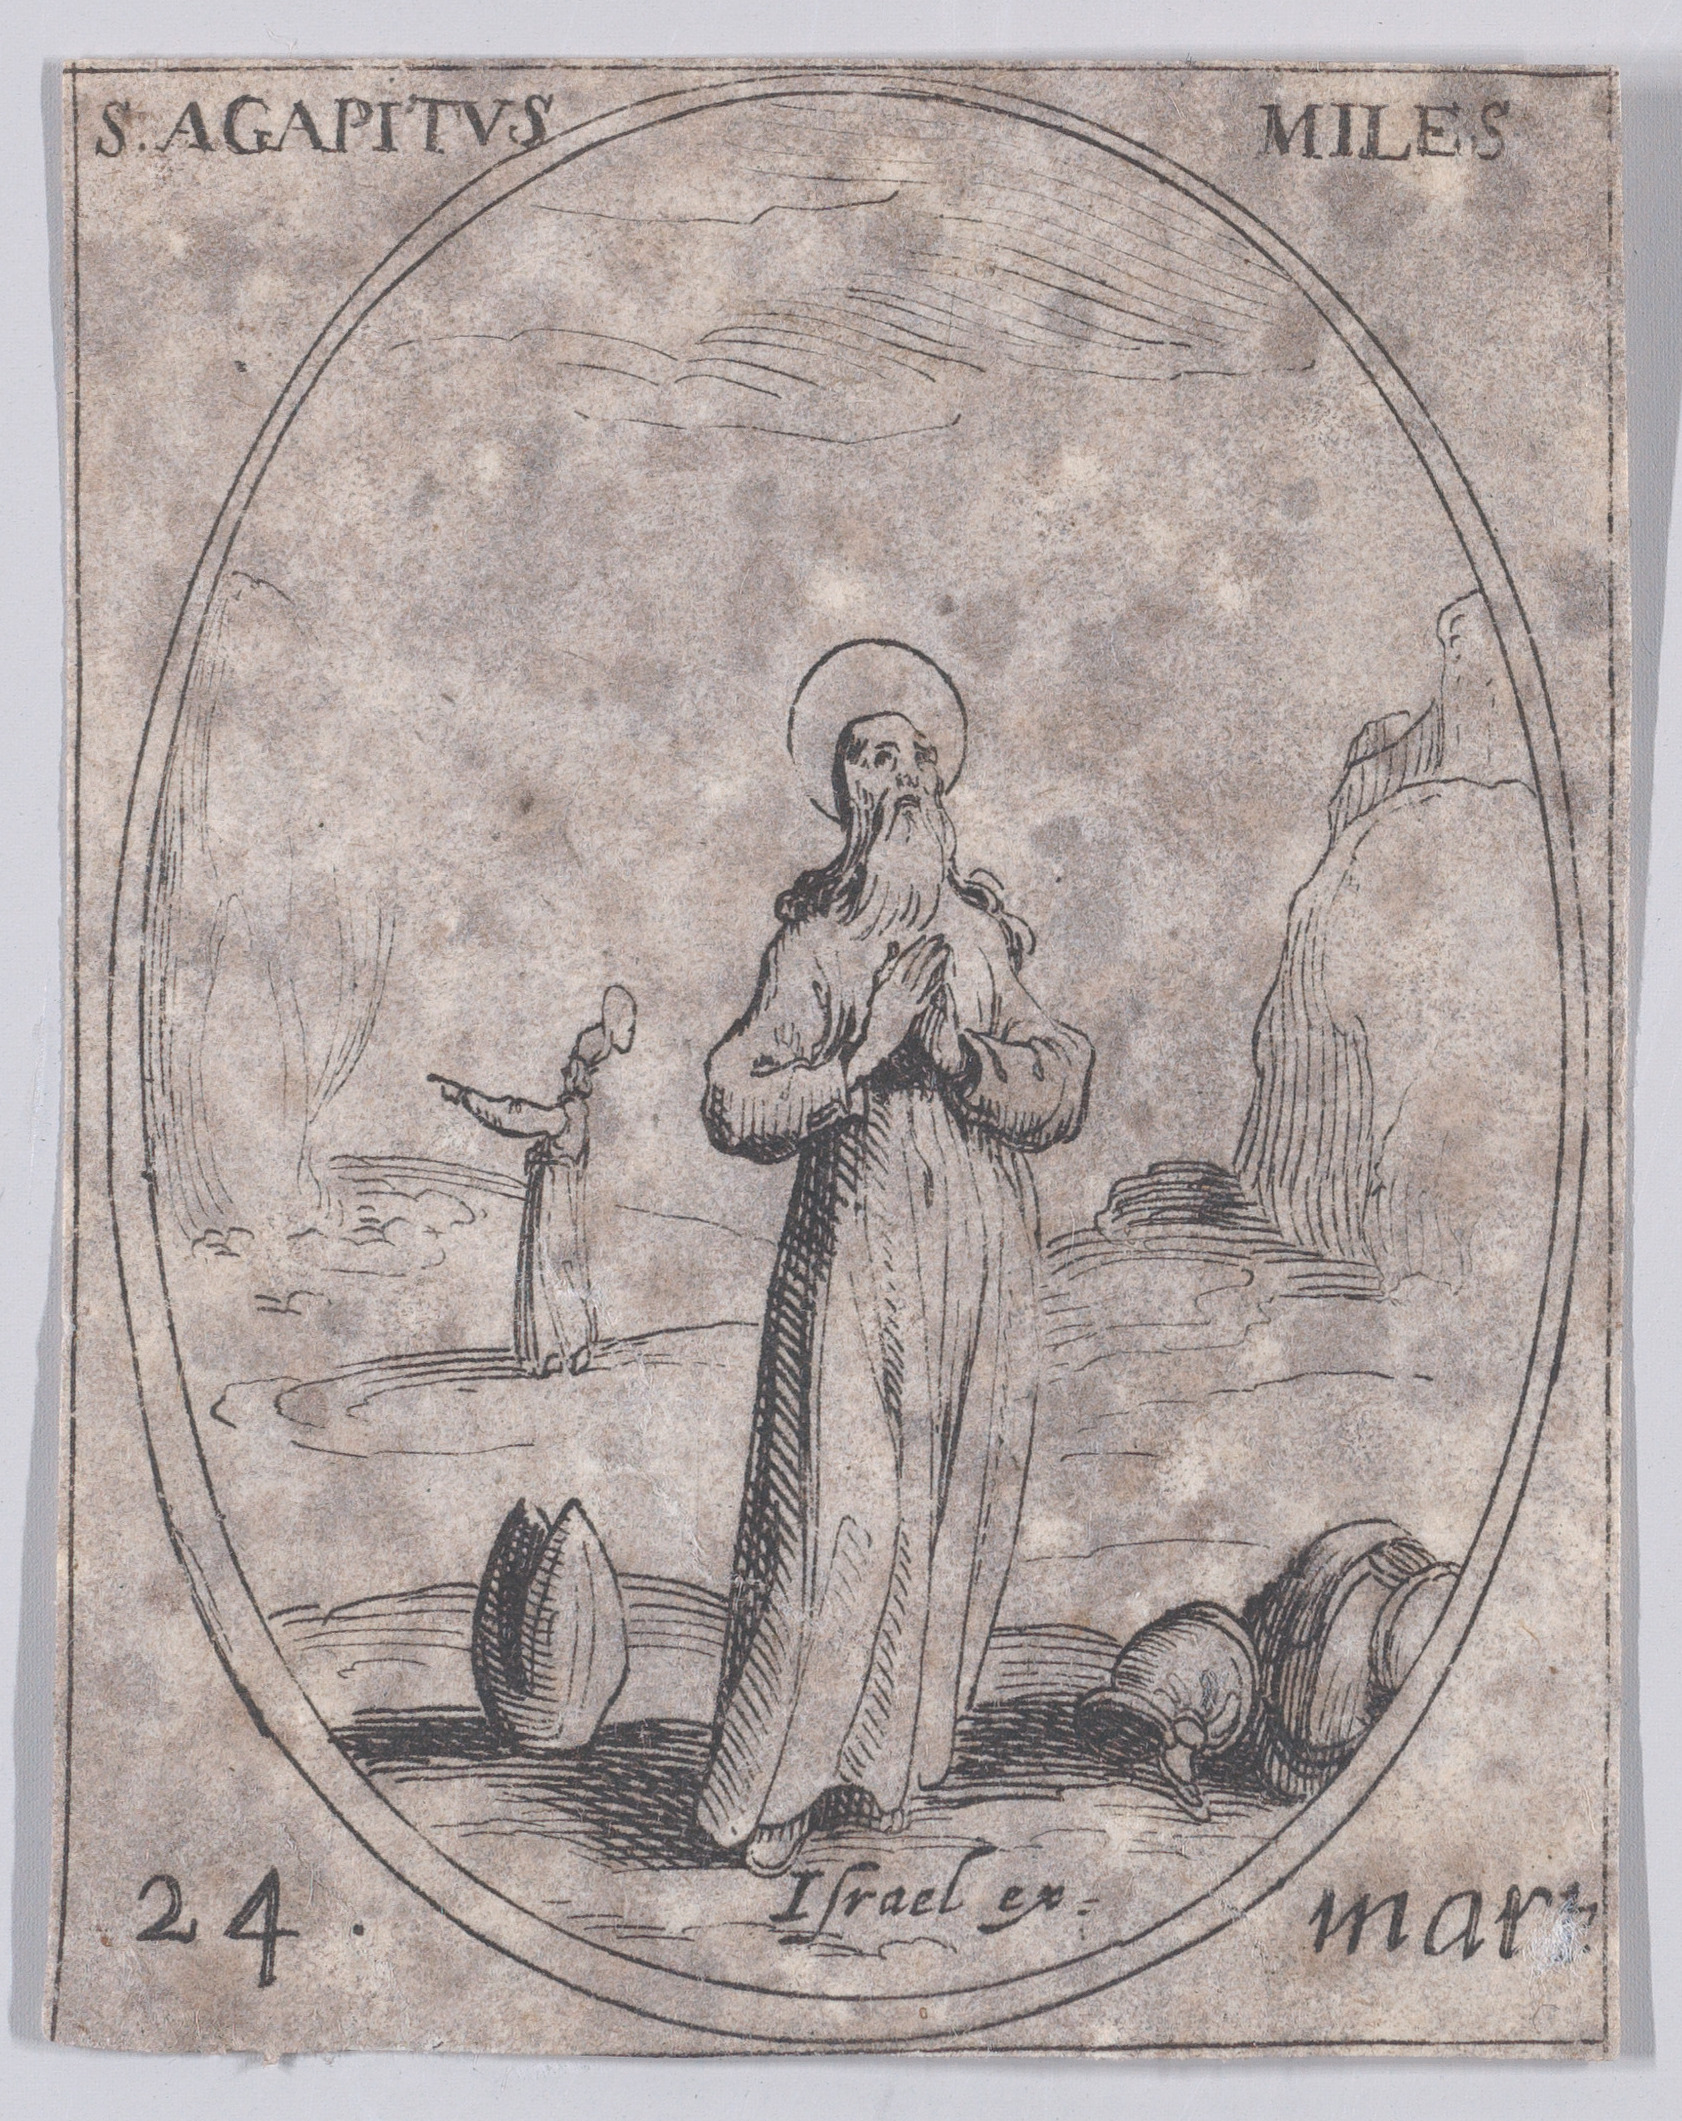 S. Agapit, soldat (St. Agapitus, Soldier), March 24th, from Les Images De Tous Les Saincts et Saintes de L'Année (Images of All of the Saints and Religious Events of the Year), Jacques Callot (French, Nancy 1592–1635 Nancy), Etching; second state of two (Lieure)